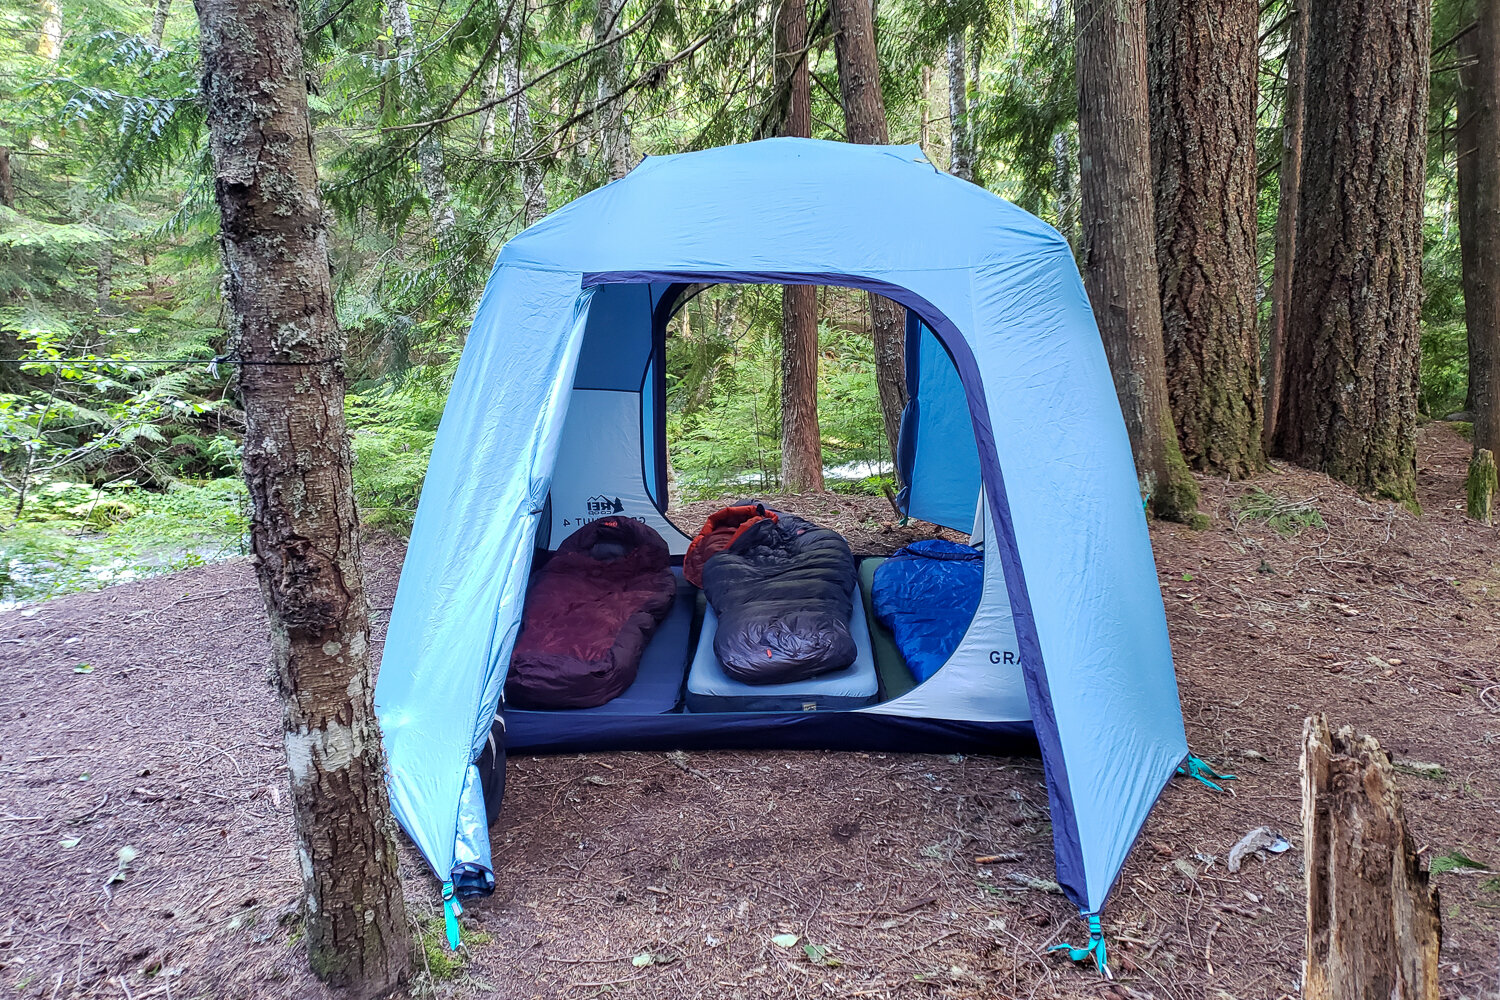 The REI Camp Dreamer XL, HEST Sleep System, and Exped MegaMat 10 LXW in the REI Grand Hut 4 Tent